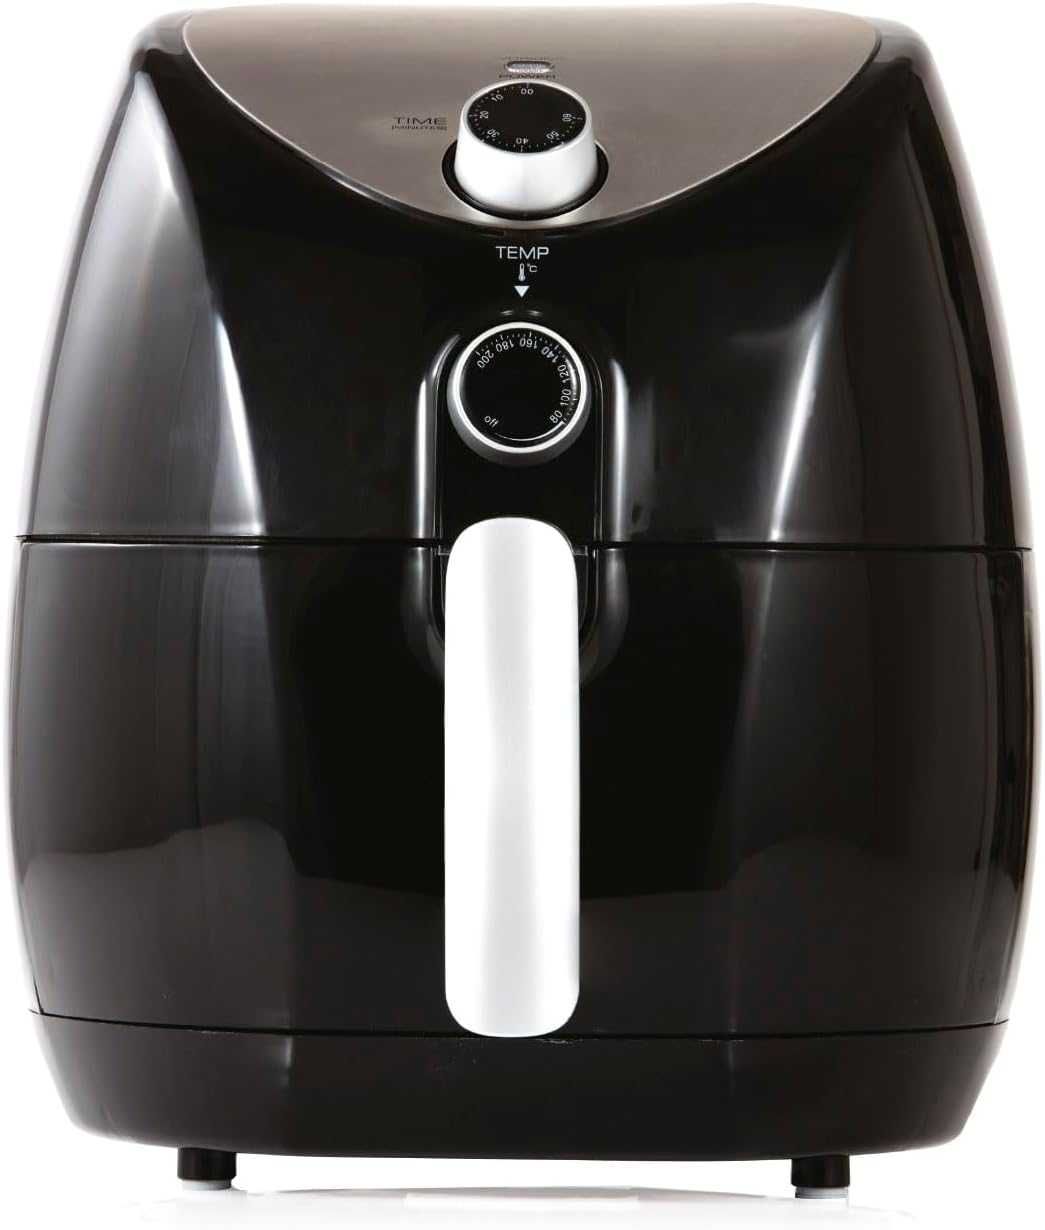 Frytkownica air fryer Tower T17021VDE 1500 W 4,3 l P12A2